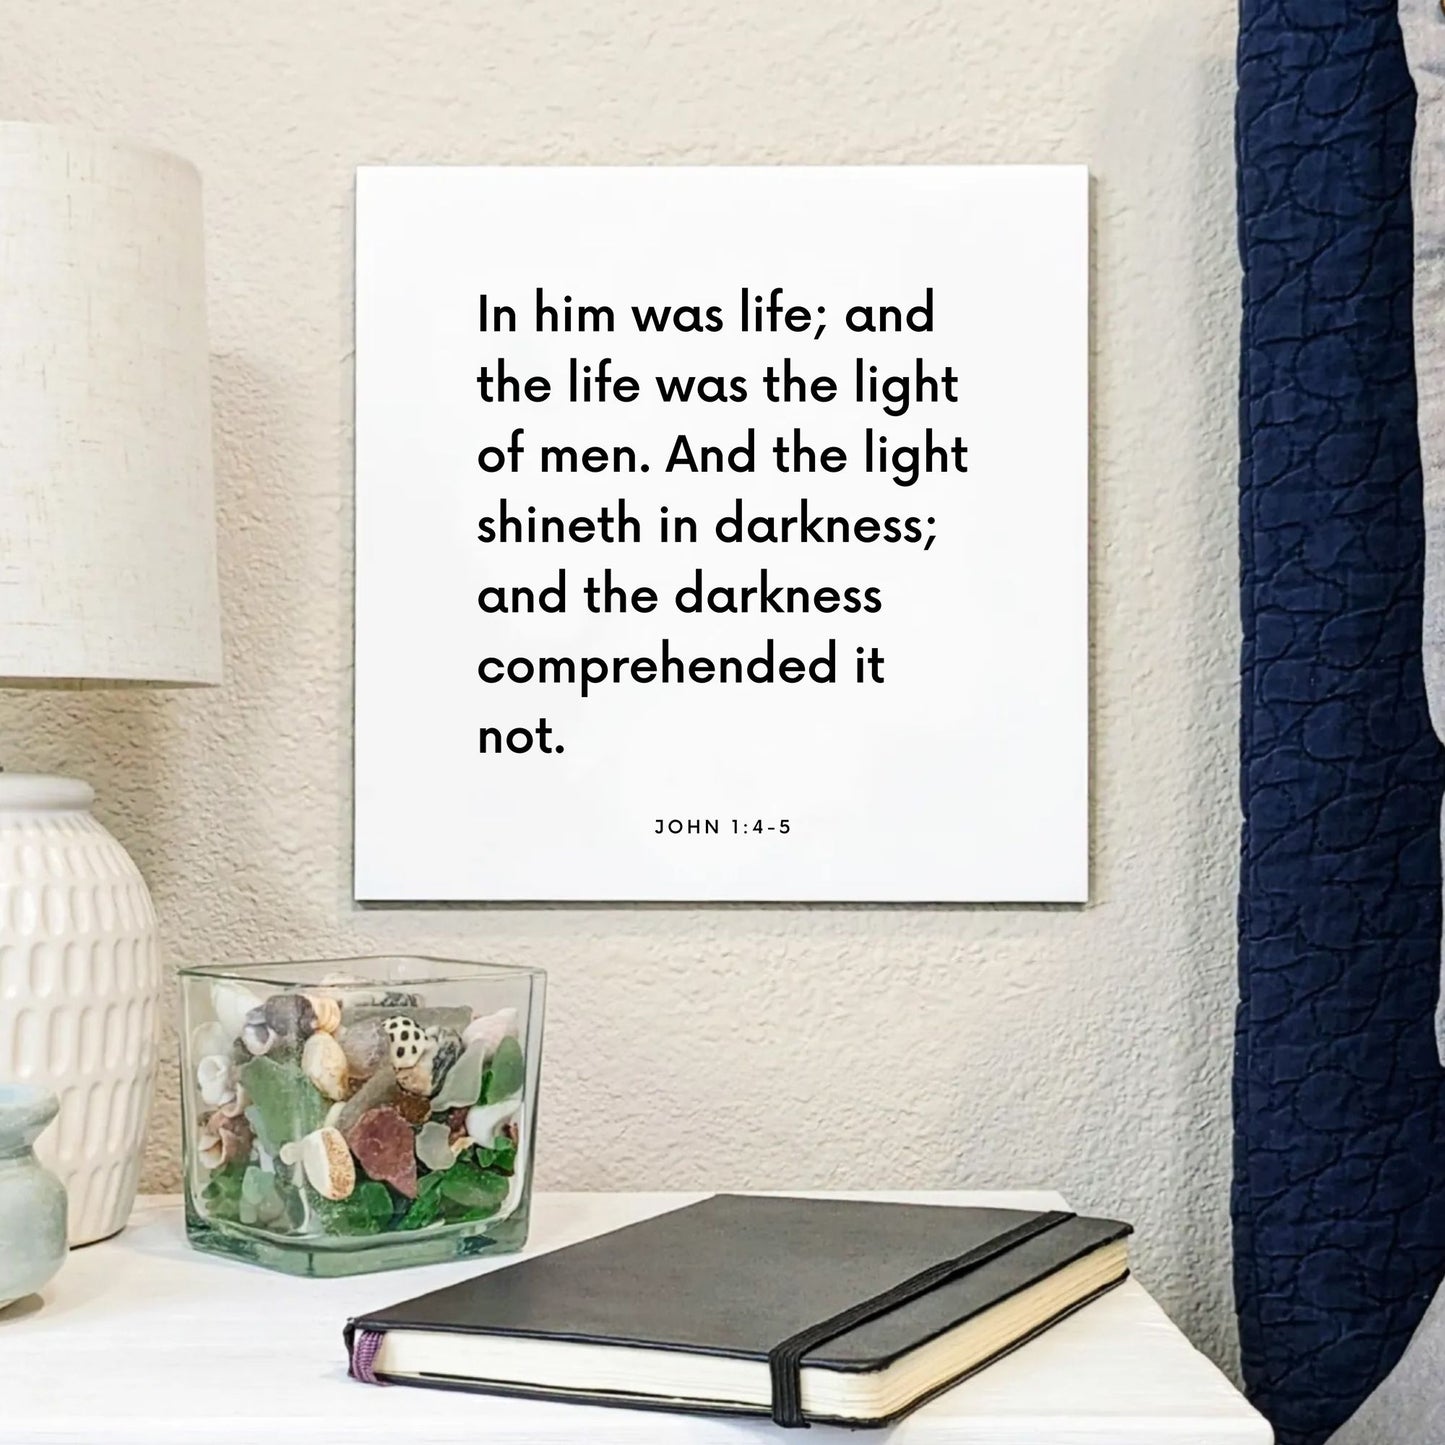 Bedside mouting of the scripture tile for John 1:4-5 - "In him was life; and the life was the light of men"